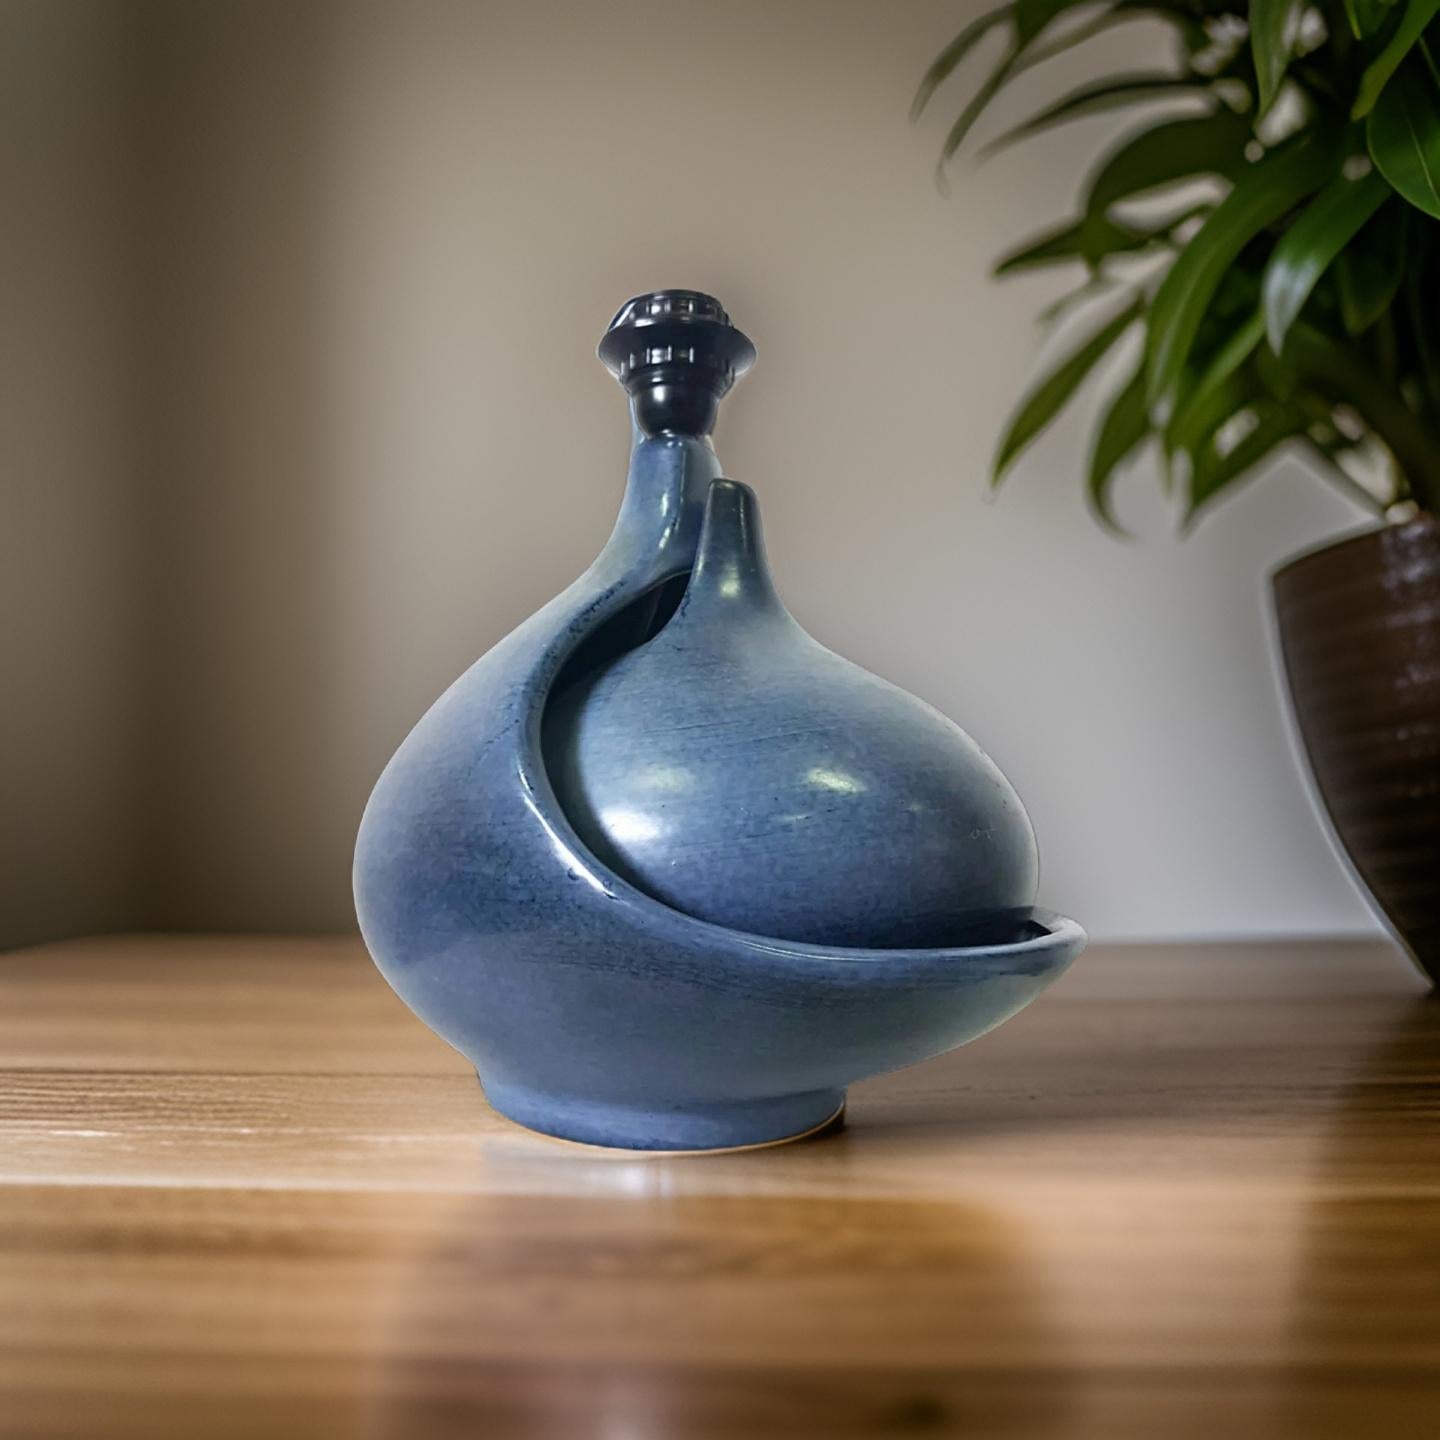 Handcrafted table lamp by Fred and Andree Stocker. Made from ceramics with a blue glaze finish. The inner part fits inside the main piece. We are not exactly sure what the creators intention was for this or that is is mainly esthetic. You could use